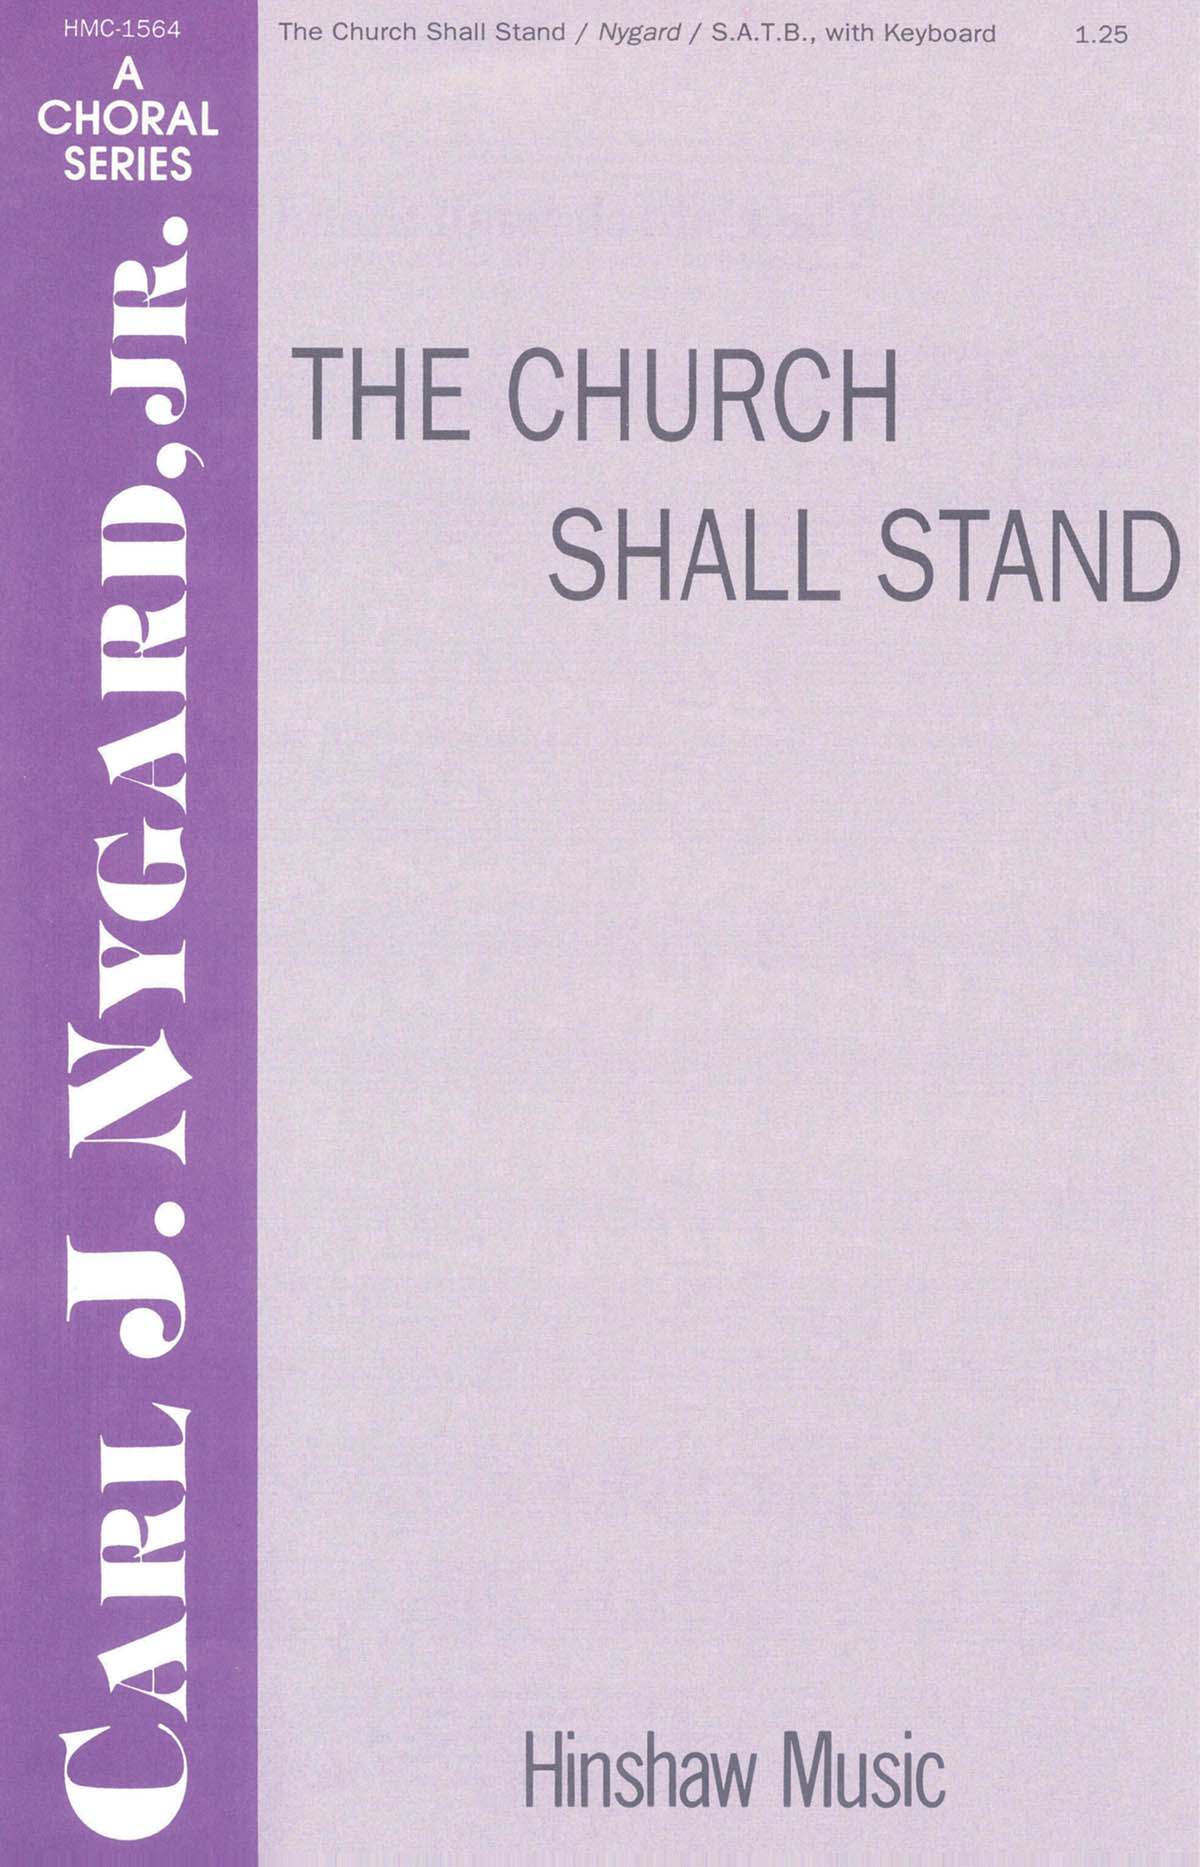 The Church Shall Stand